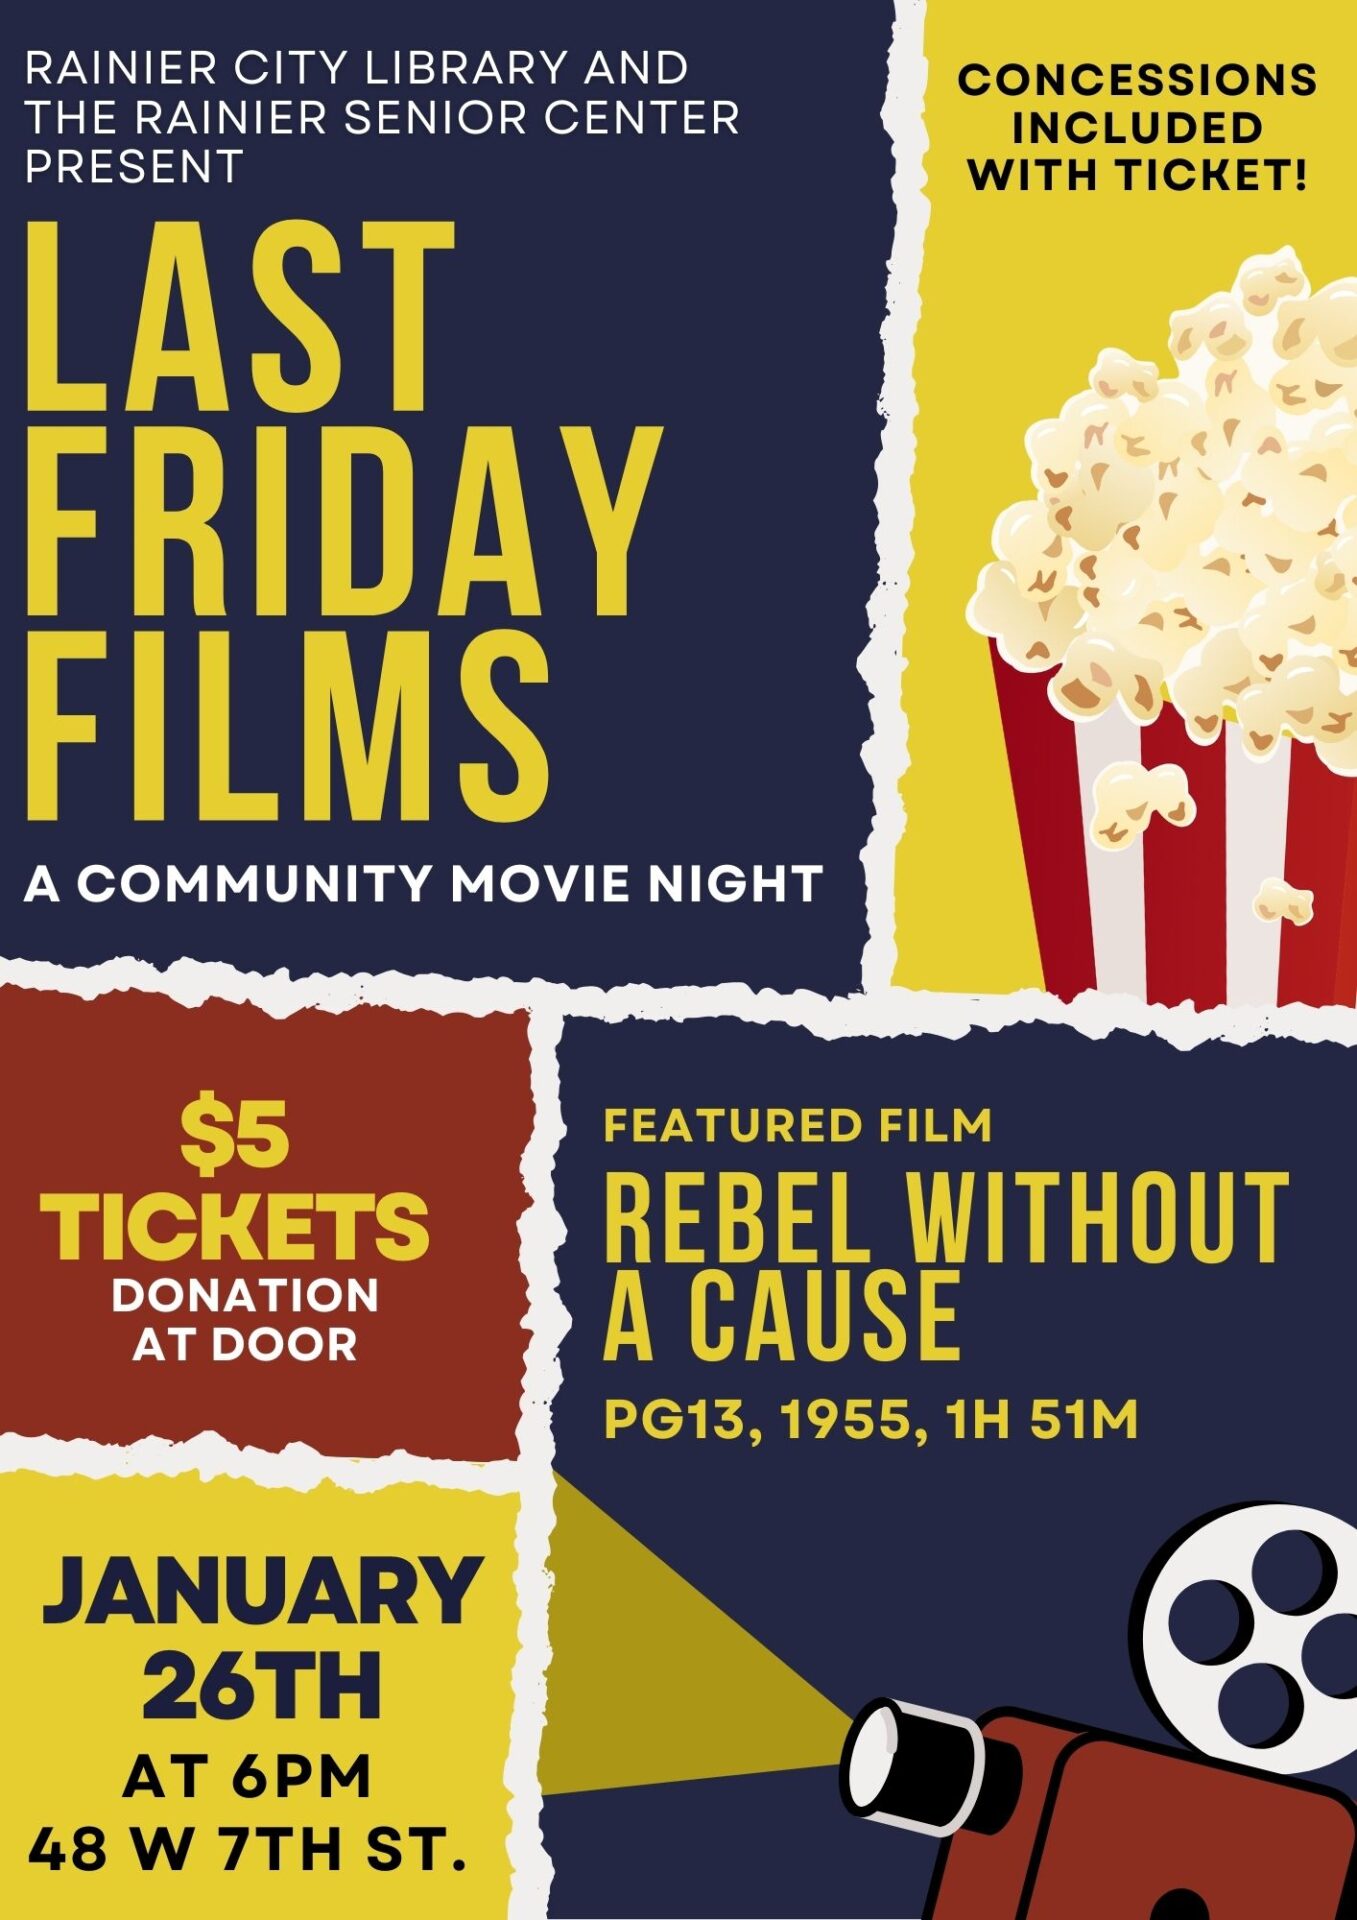 Last Friday Films: Rebel Without A Cause